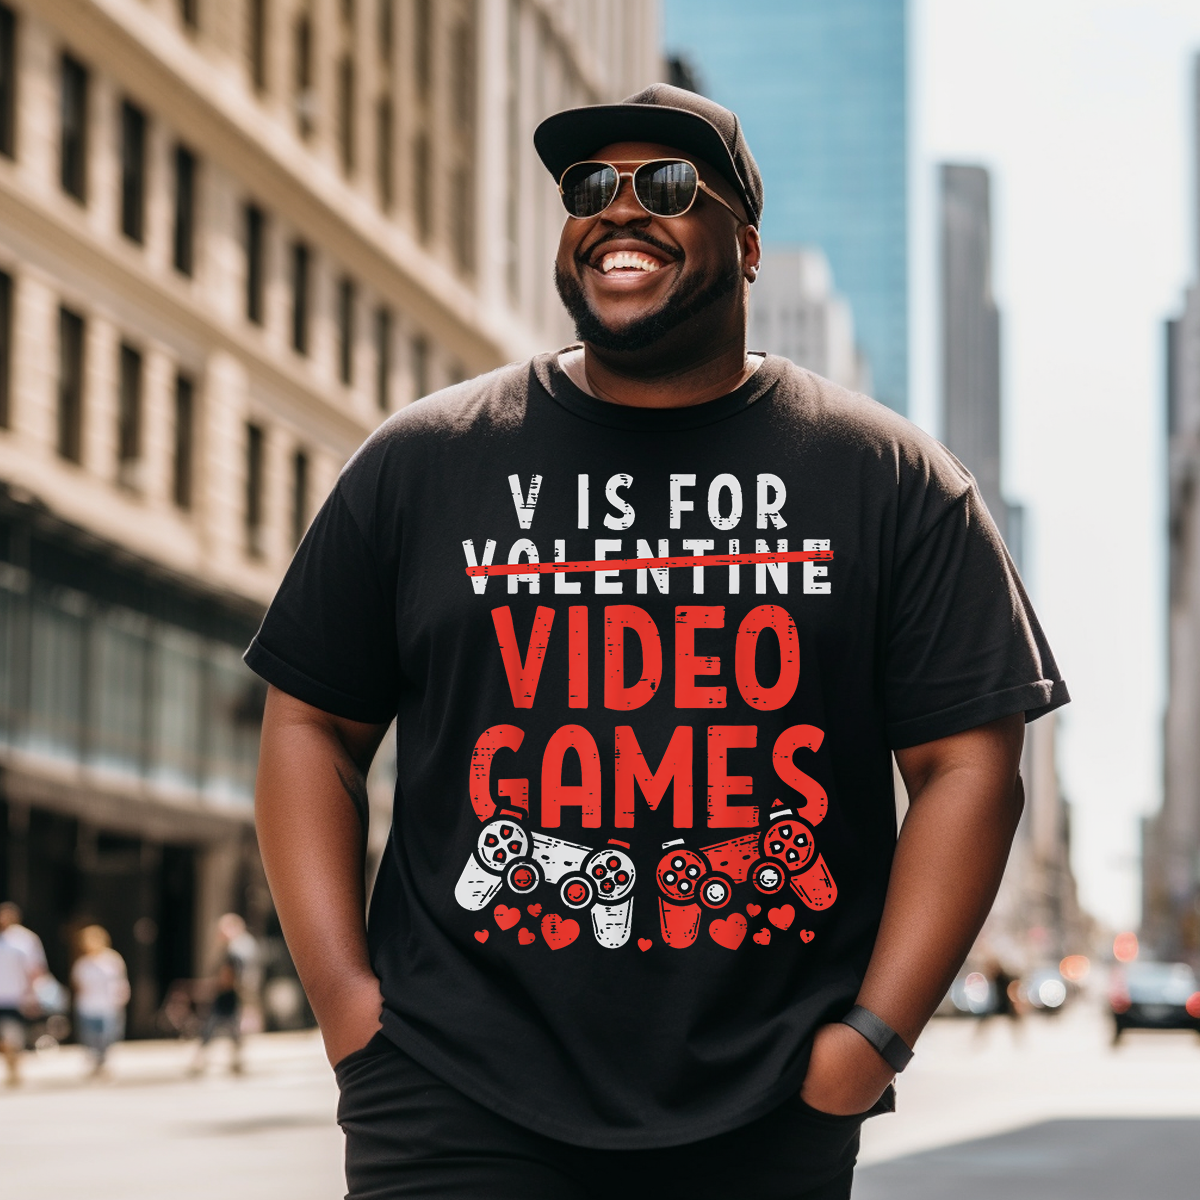 V IS FOR VIDEO GAMES Valentines Day T-Shirt, Men Plus Size Oversize T-shirt for Big & Tall Man